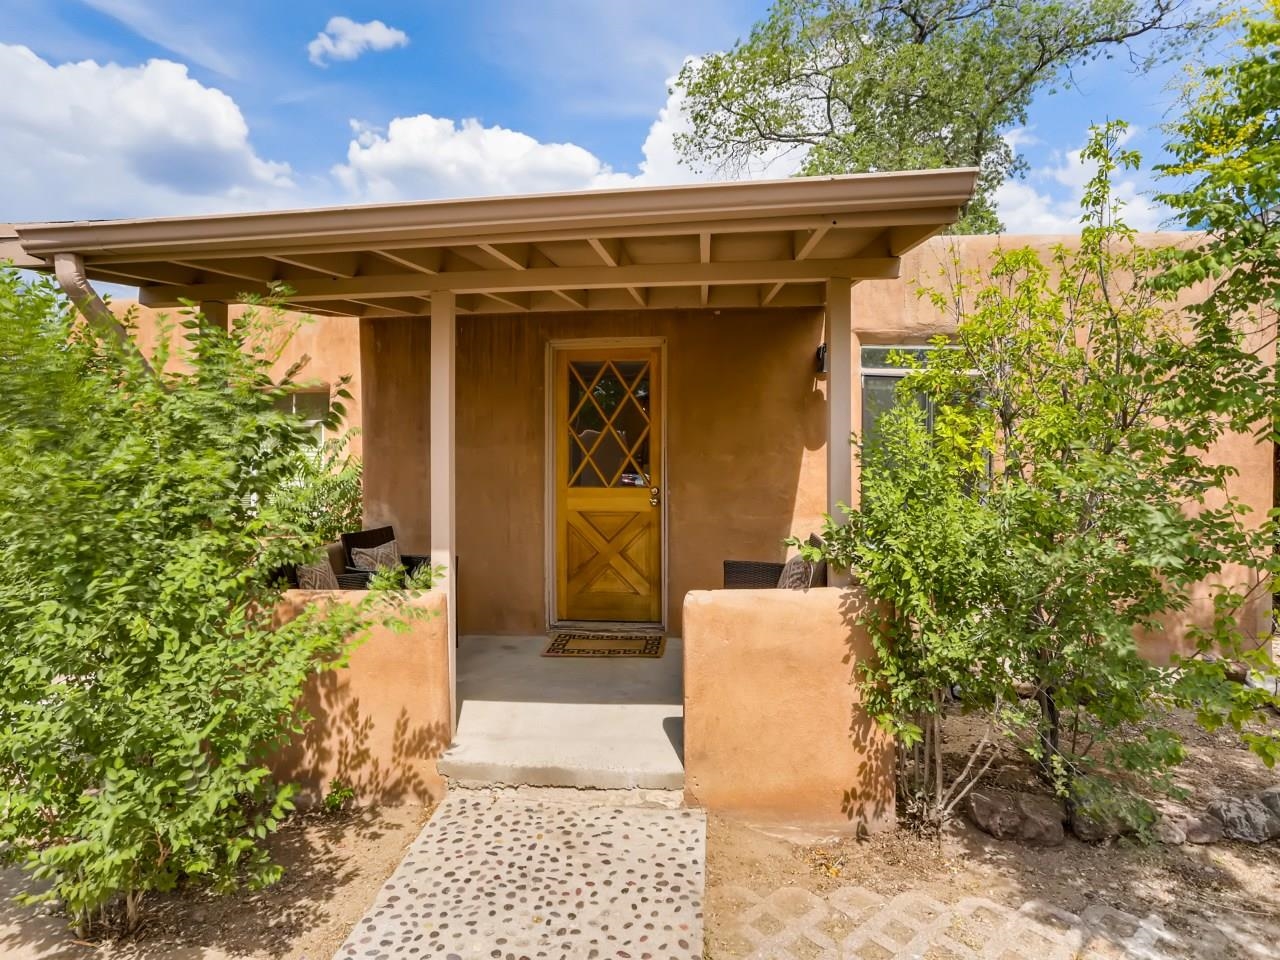 149 Fiesta St A B C, Santa Fe, New Mexico 87501, 6 Bedrooms Bedrooms, ,4 BathroomsBathrooms,Residential,For Sale,149 Fiesta St A B C,202201721